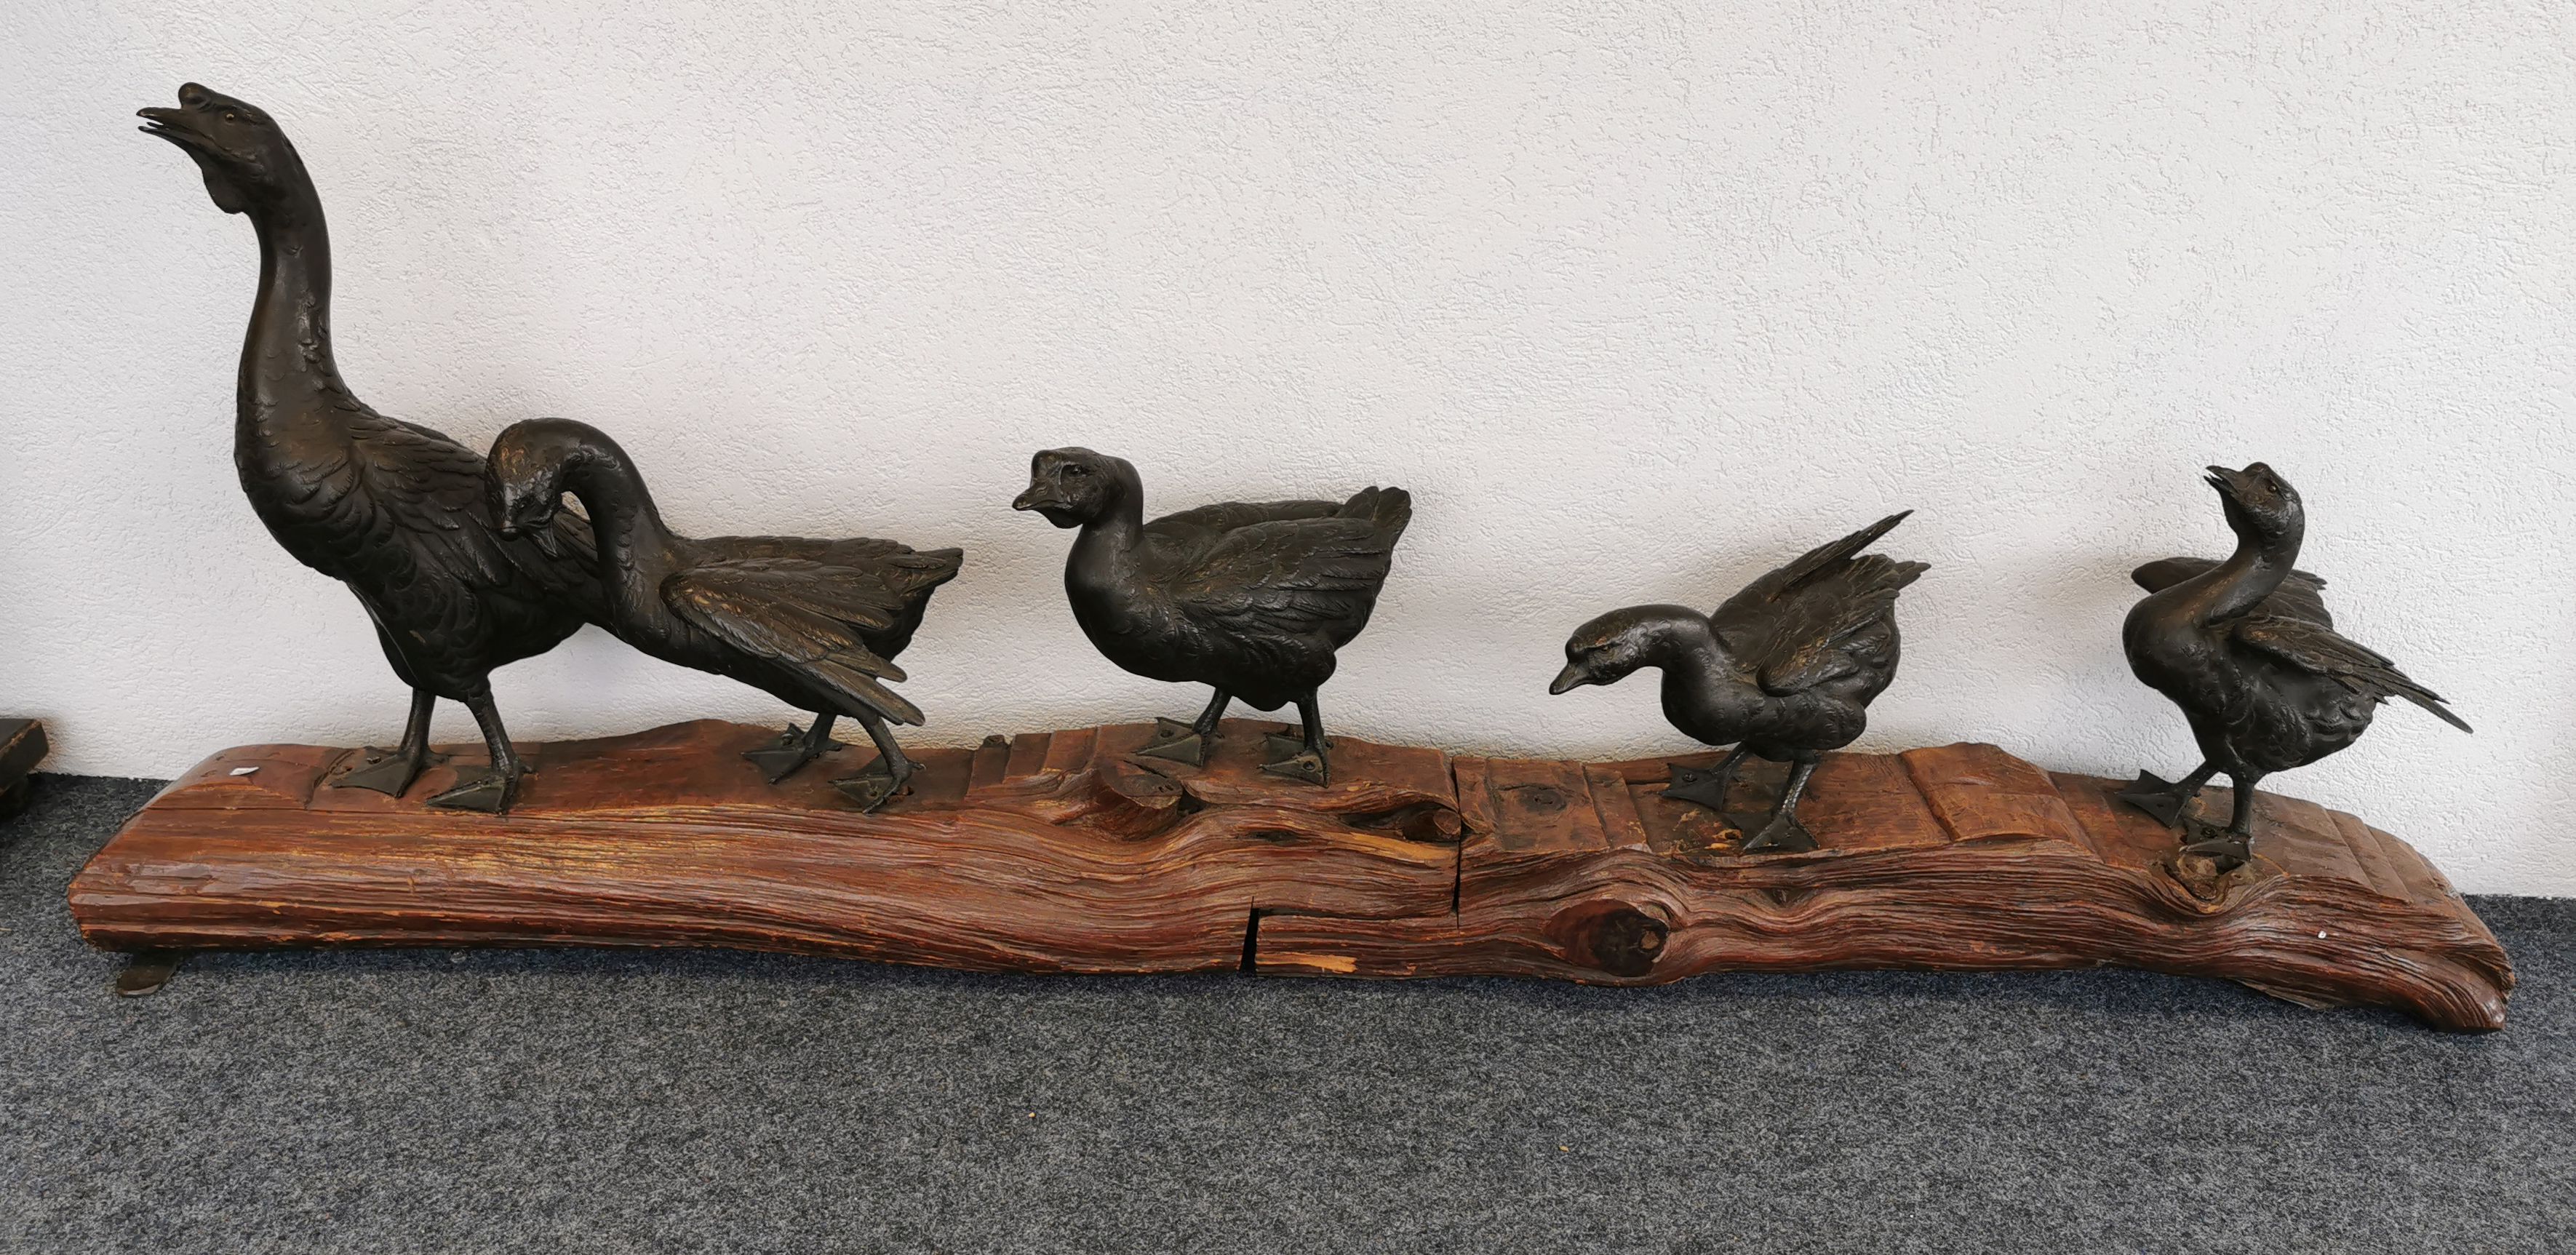 SCULPTURE GROUP "5 GEESE"